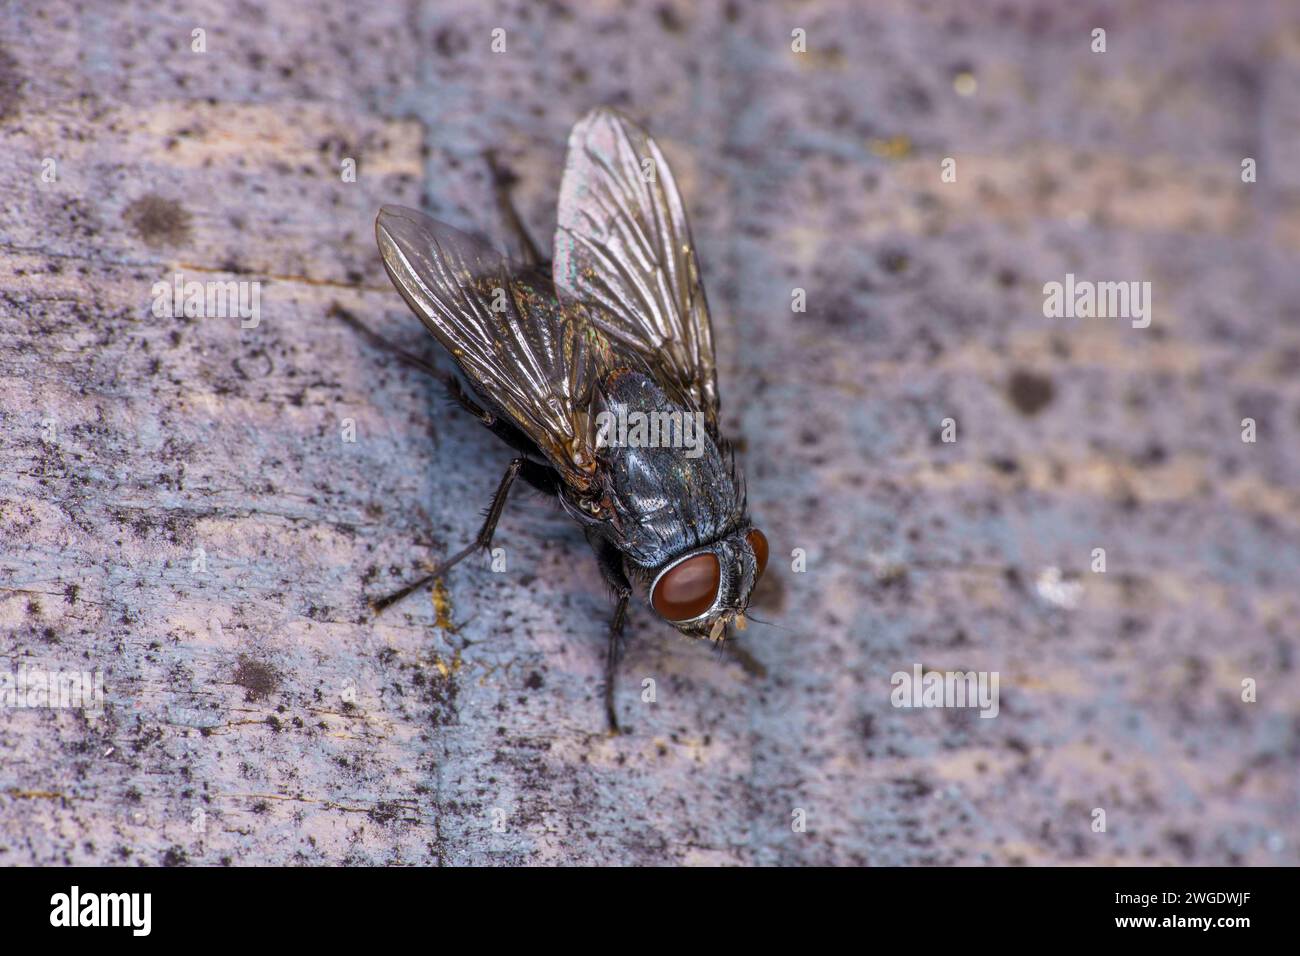 Muscina levida Genus Muscina Family Muscidae fly wild nature insect wallpaper, picture, photography Stock Photo